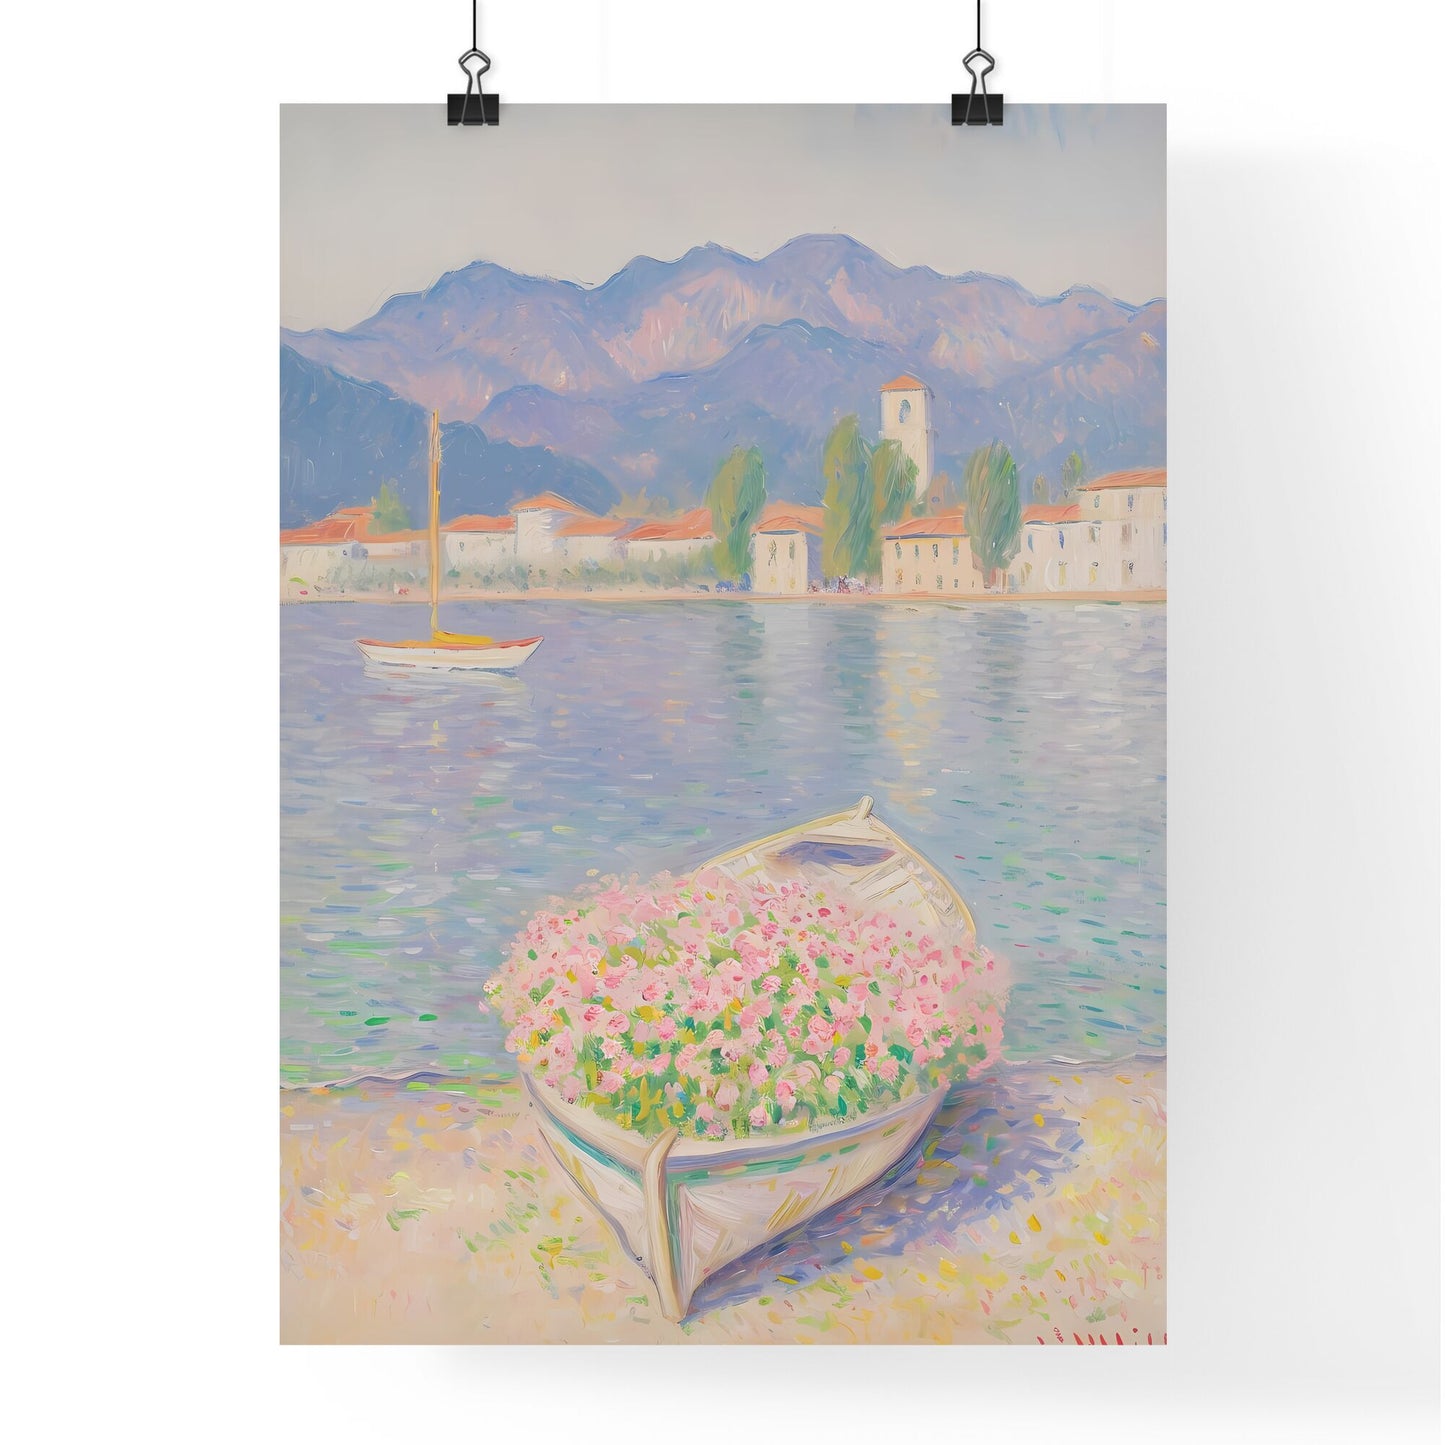 A Poster of a italy seaside - A Painting Of A Boat With Flowers In It Default Title